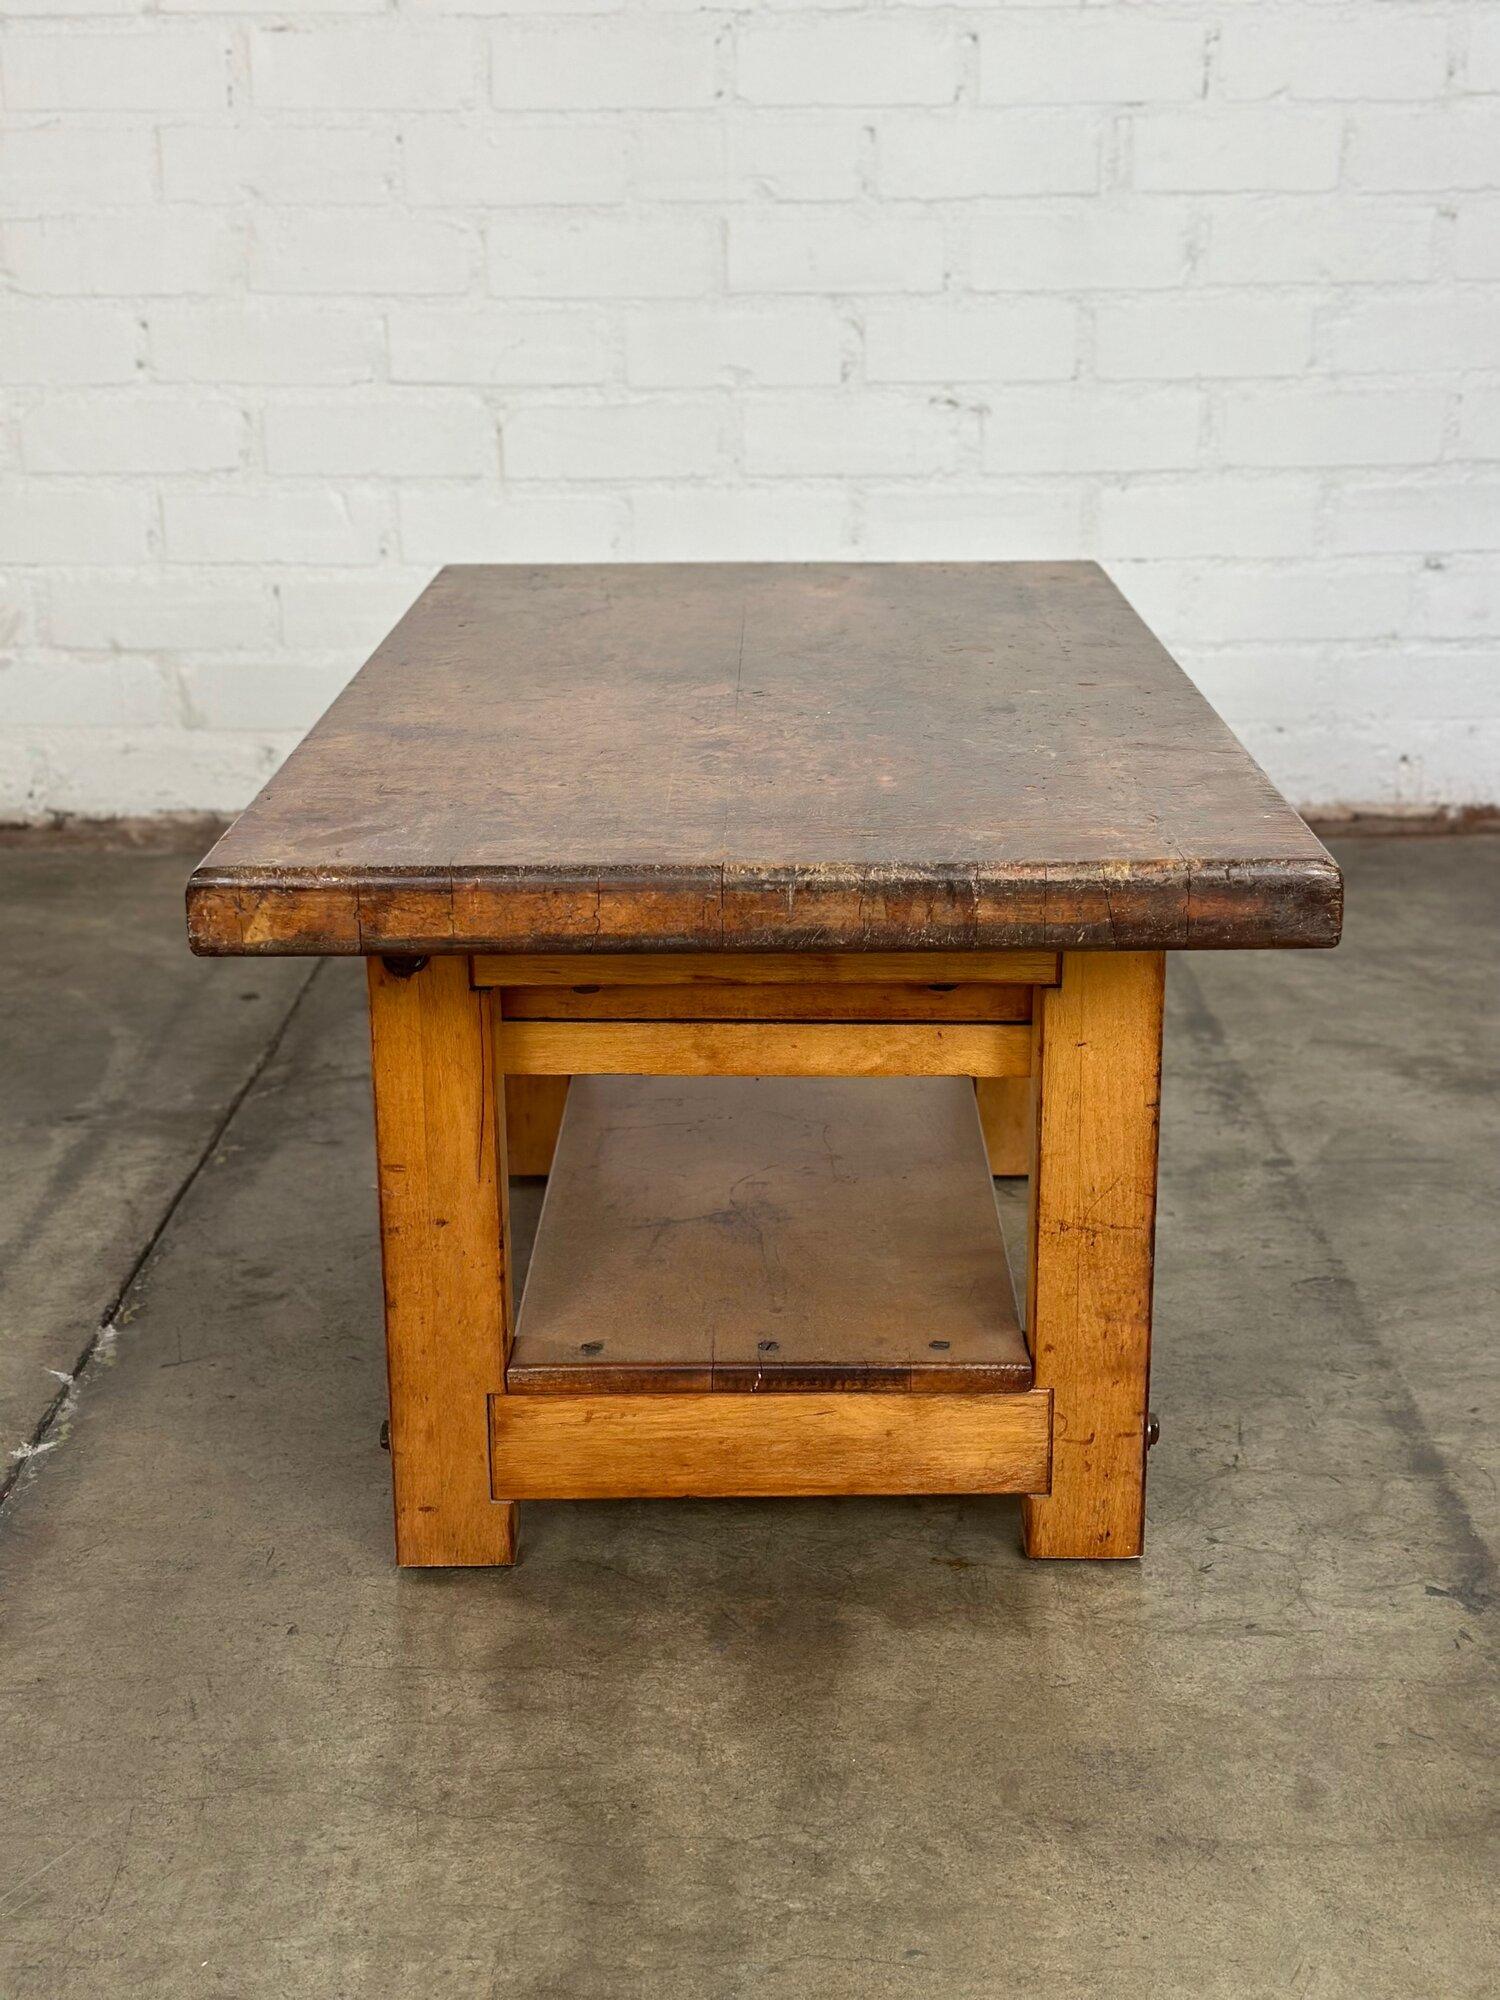 Rustic low profile work bench- reworked 4